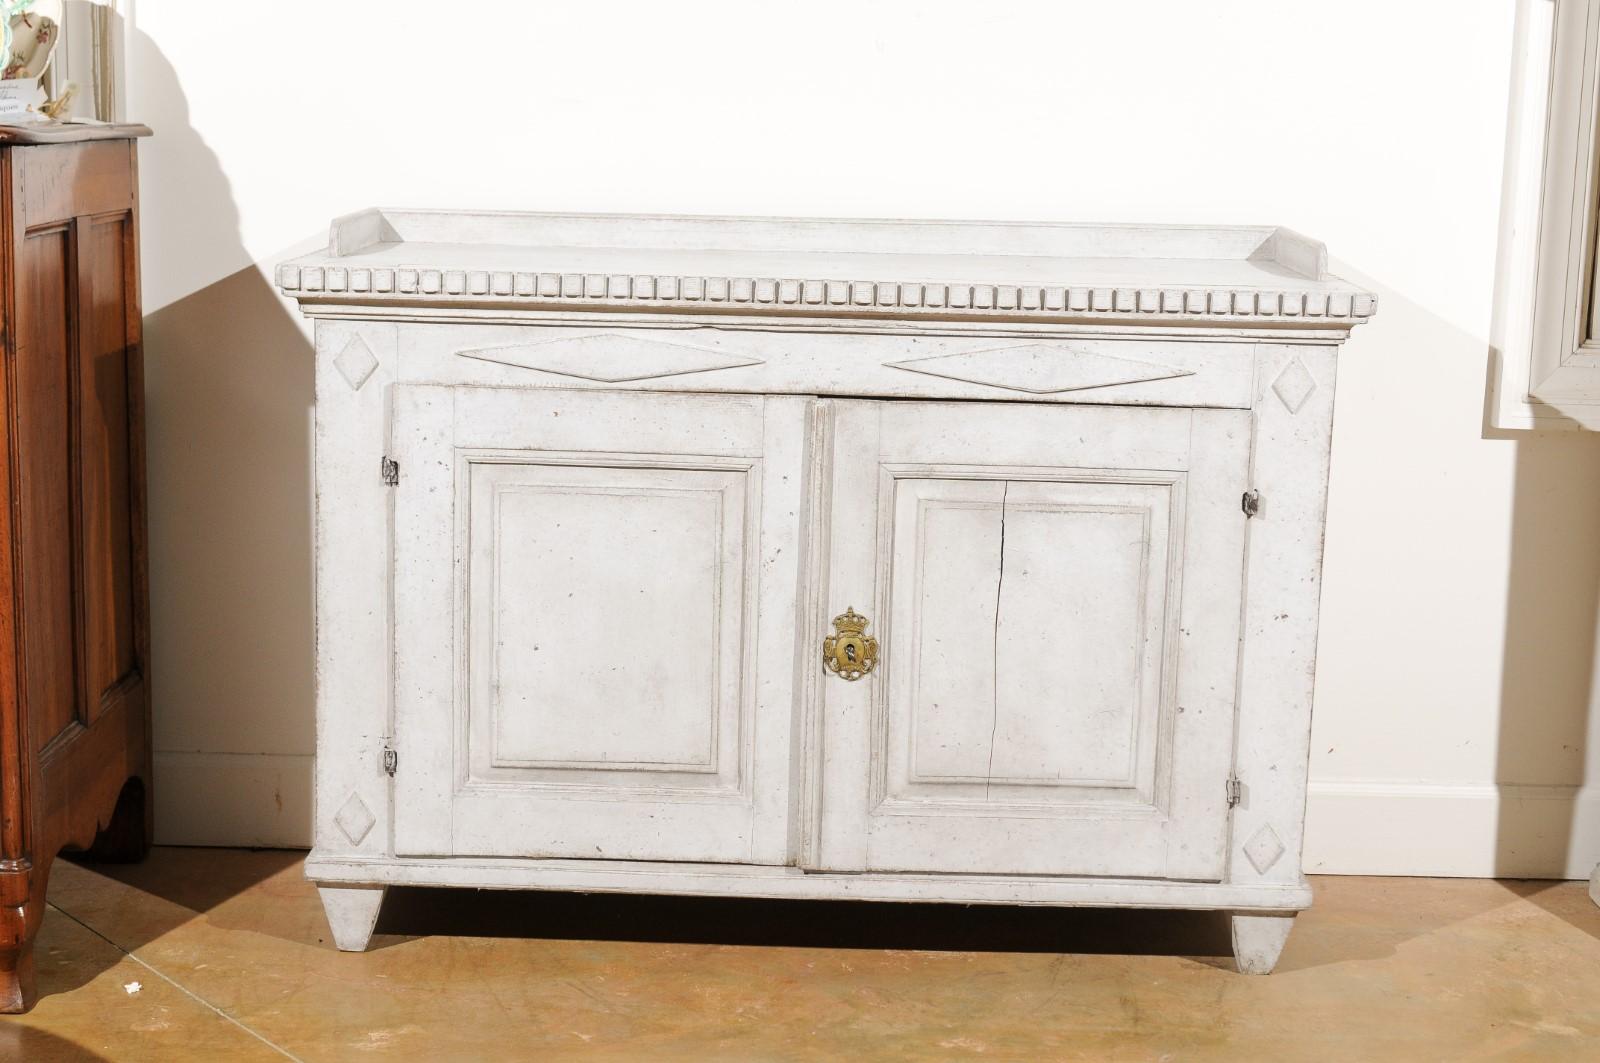 A Swedish Gustavian period painted sideboard from the late 18th century, with diamond patterns, dentil molding, original locks and hardware. Created in Sweden during the last decade of the 18th century, this Gustavian sideboard features a